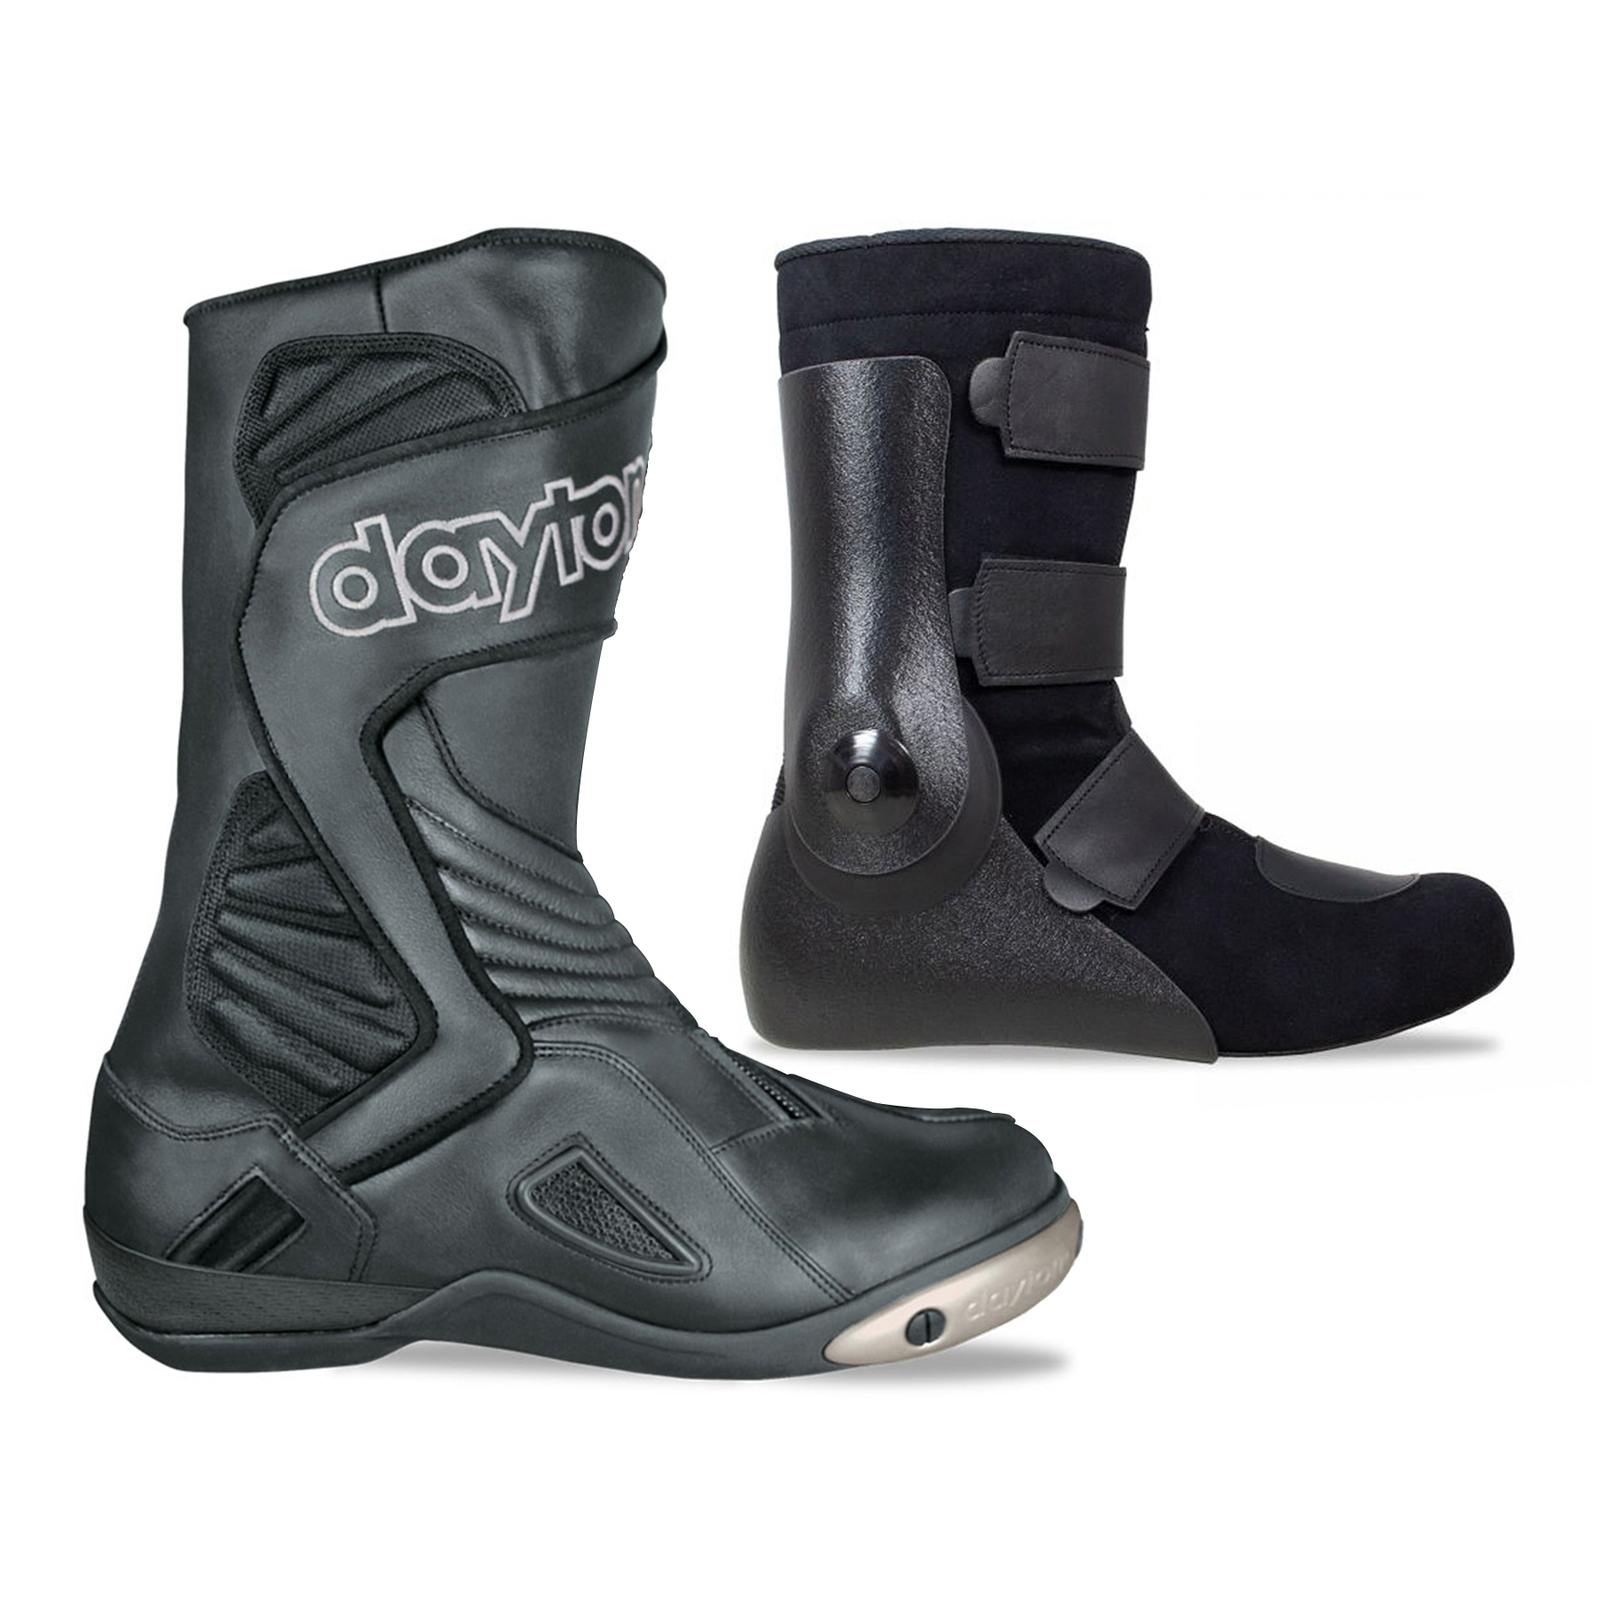 Daytona EVO Voltex Boots Black - Available in Various Sizes